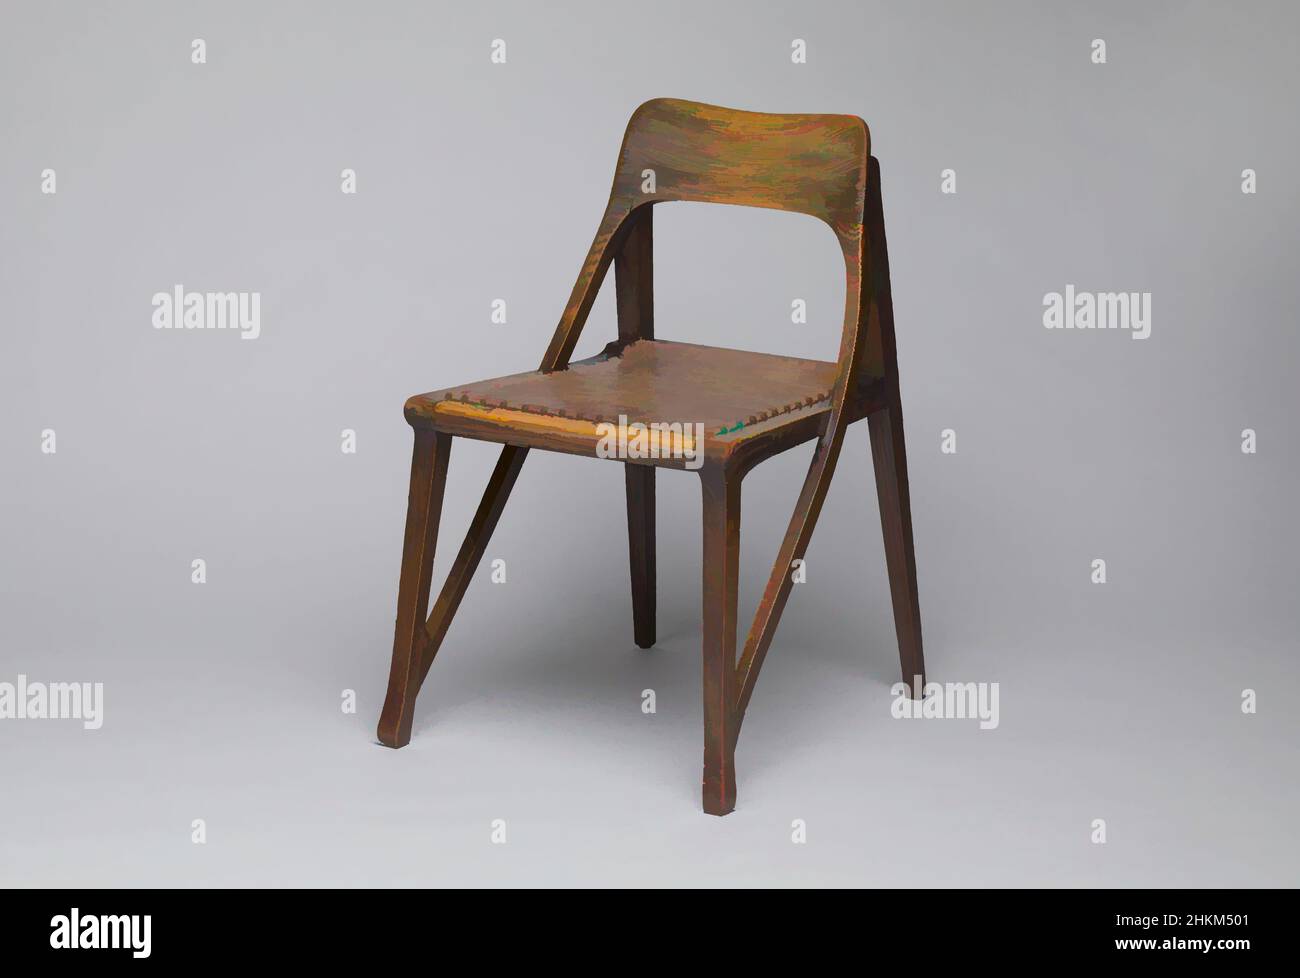 Art inspired by Chair, Richard Riemerschmid, German, 1868-1957, Vereinigte Werkstätten für Kunst im Handwerk, Munich, Germany, 1897-1991, 1898-99, Oak and replacement leather, Made in Munich, Bavaria, Germany, Europe, Furniture, 31 3/8 x 18 1/8 x 22 1/2 in. (79.7 x 46 x 57.2 cm, Classic works modernized by Artotop with a splash of modernity. Shapes, color and value, eye-catching visual impact on art. Emotions through freedom of artworks in a contemporary way. A timeless message pursuing a wildly creative new direction. Artists turning to the digital medium and creating the Artotop NFT Stock Photo